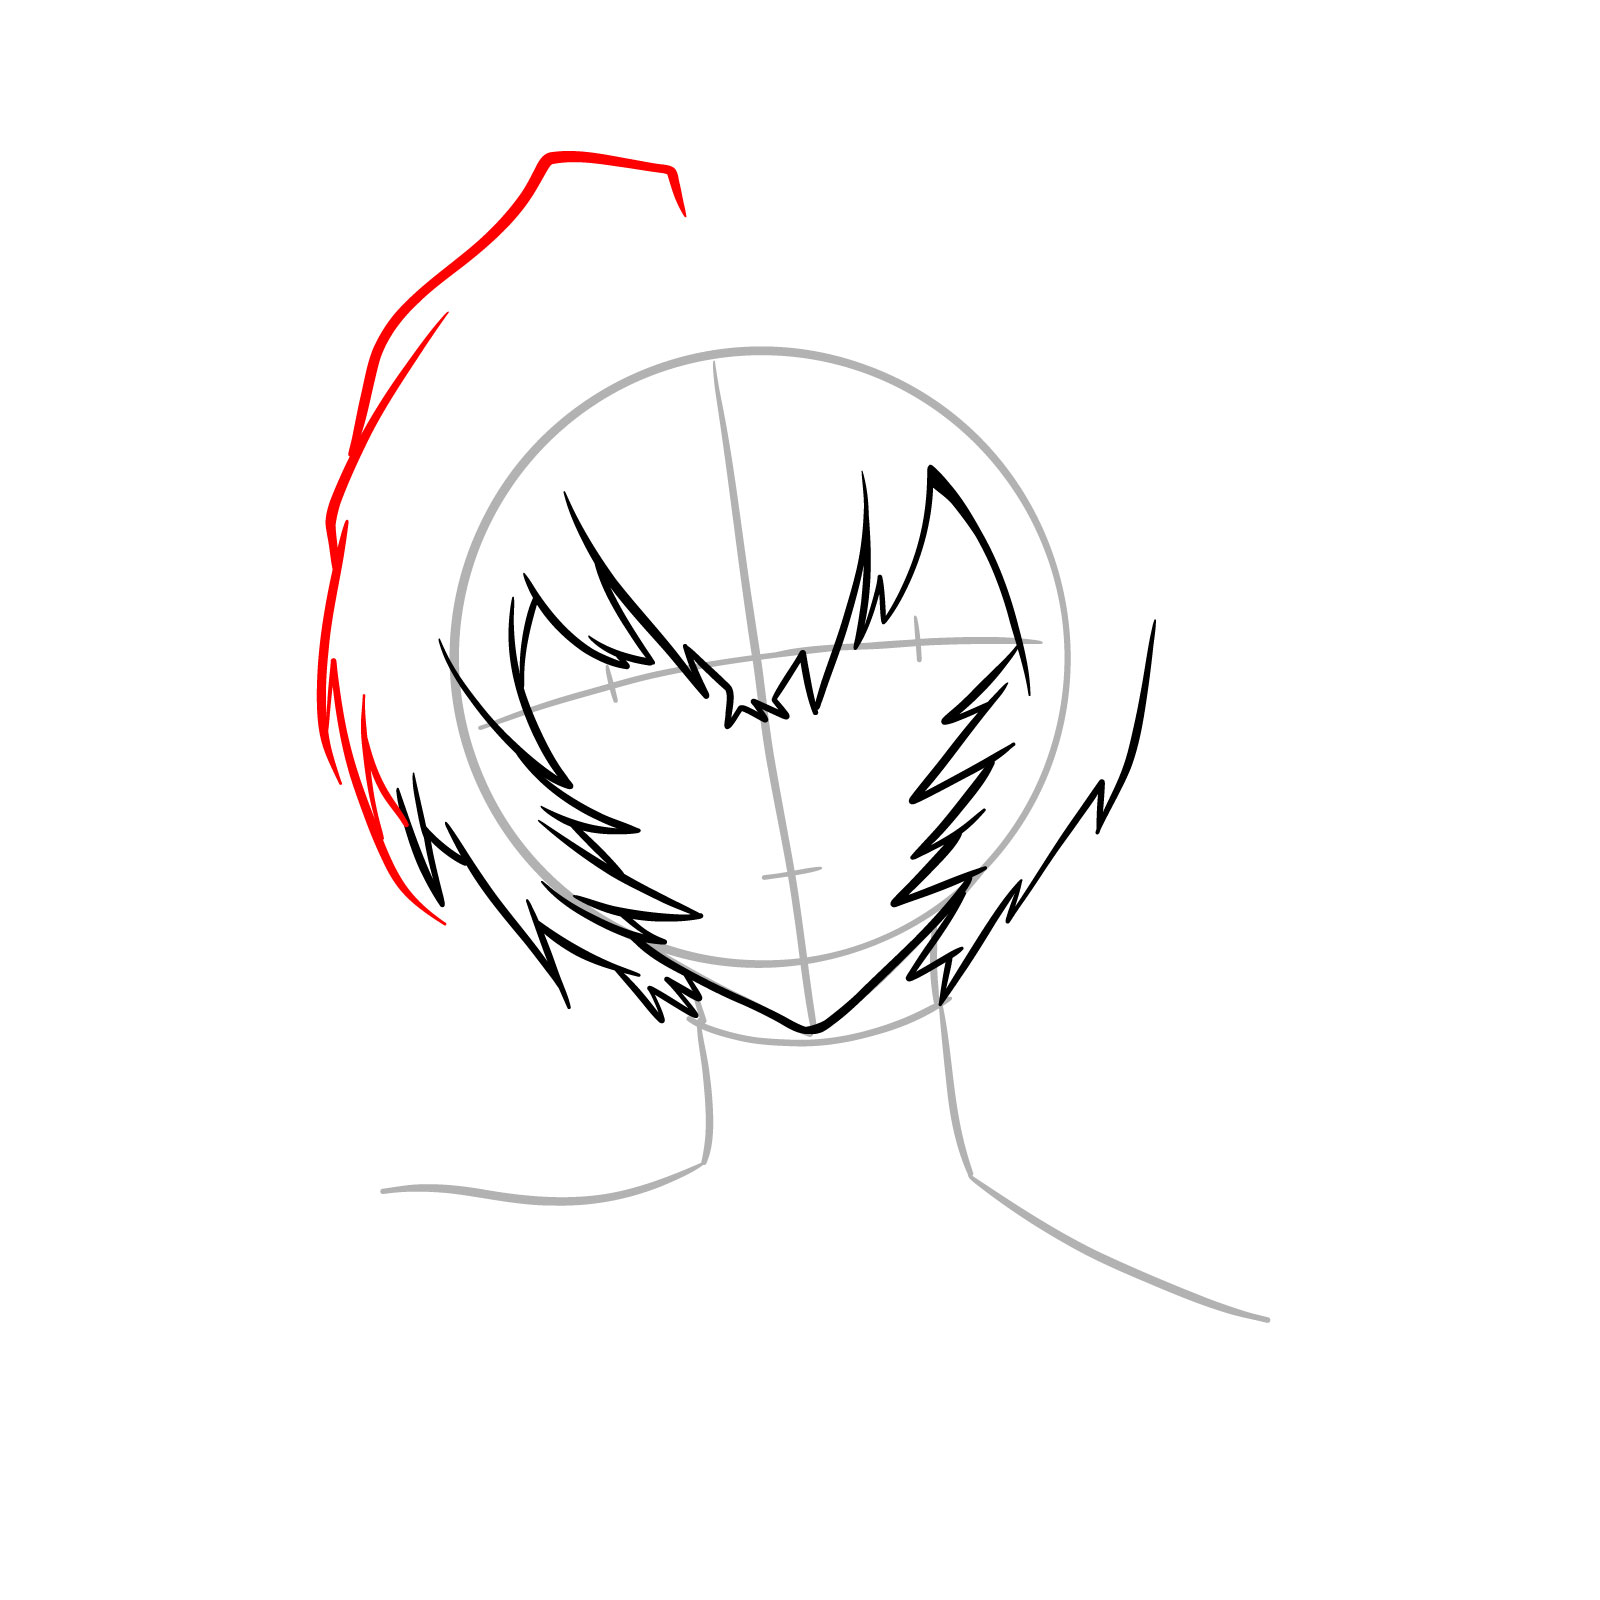 How to draw Rei Ayanami's face - Evangelion - step 07